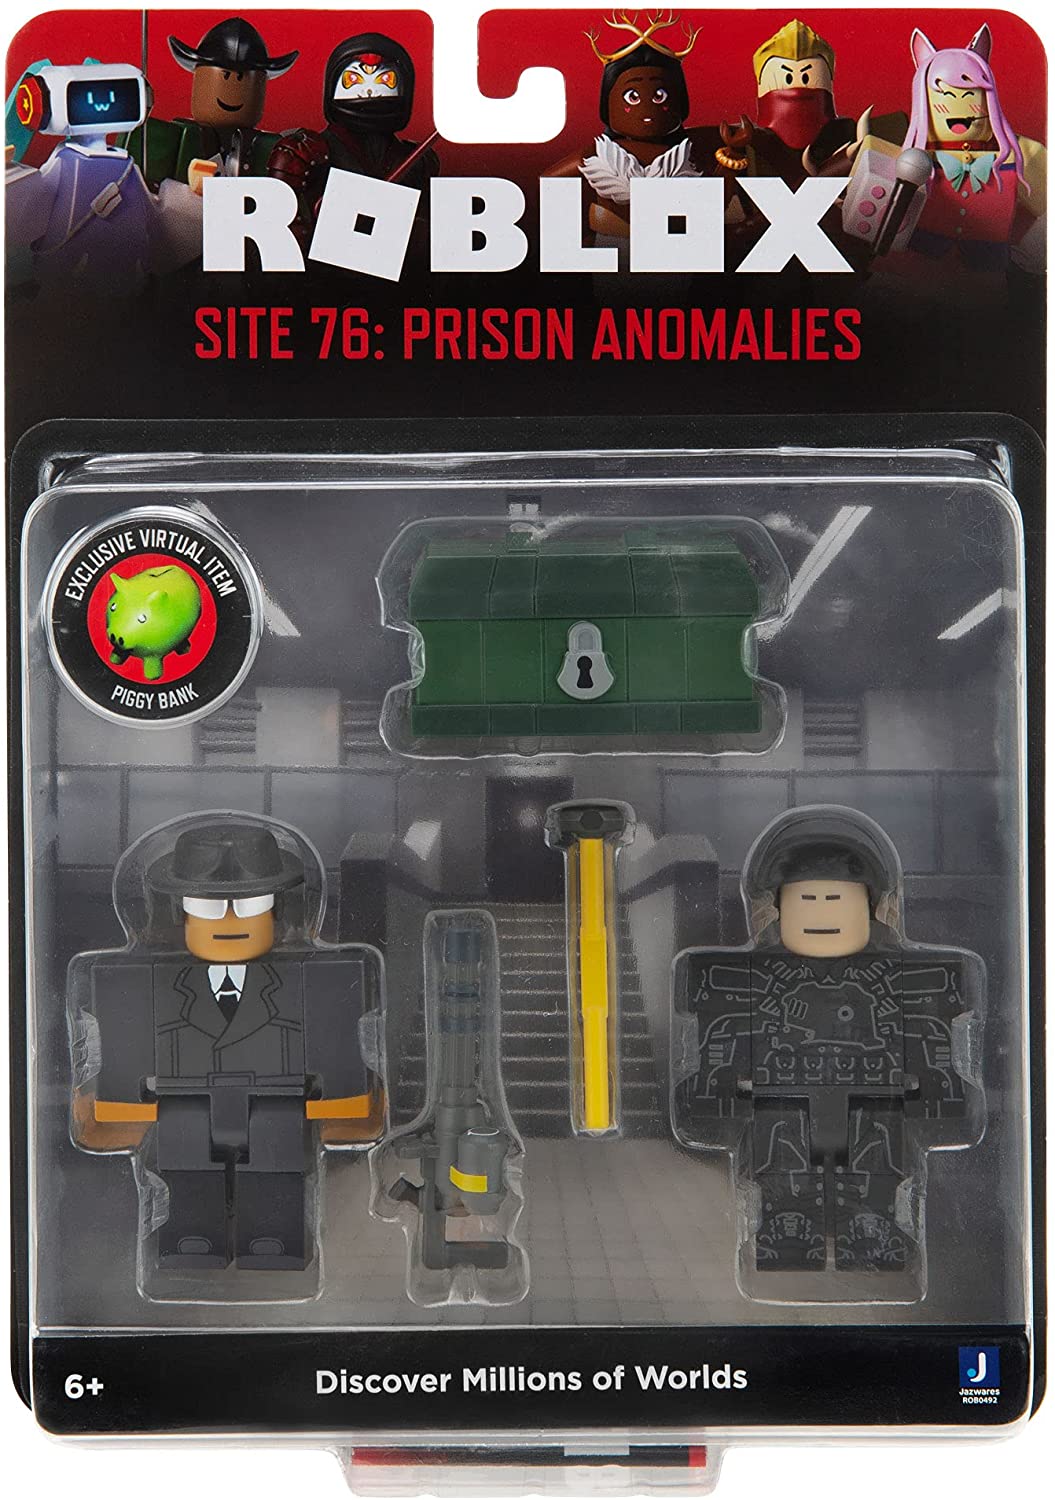 Roblox Action Collection - Site 76: Prison Anomalies Game Pack [Includes Exclusive Virtual Item]